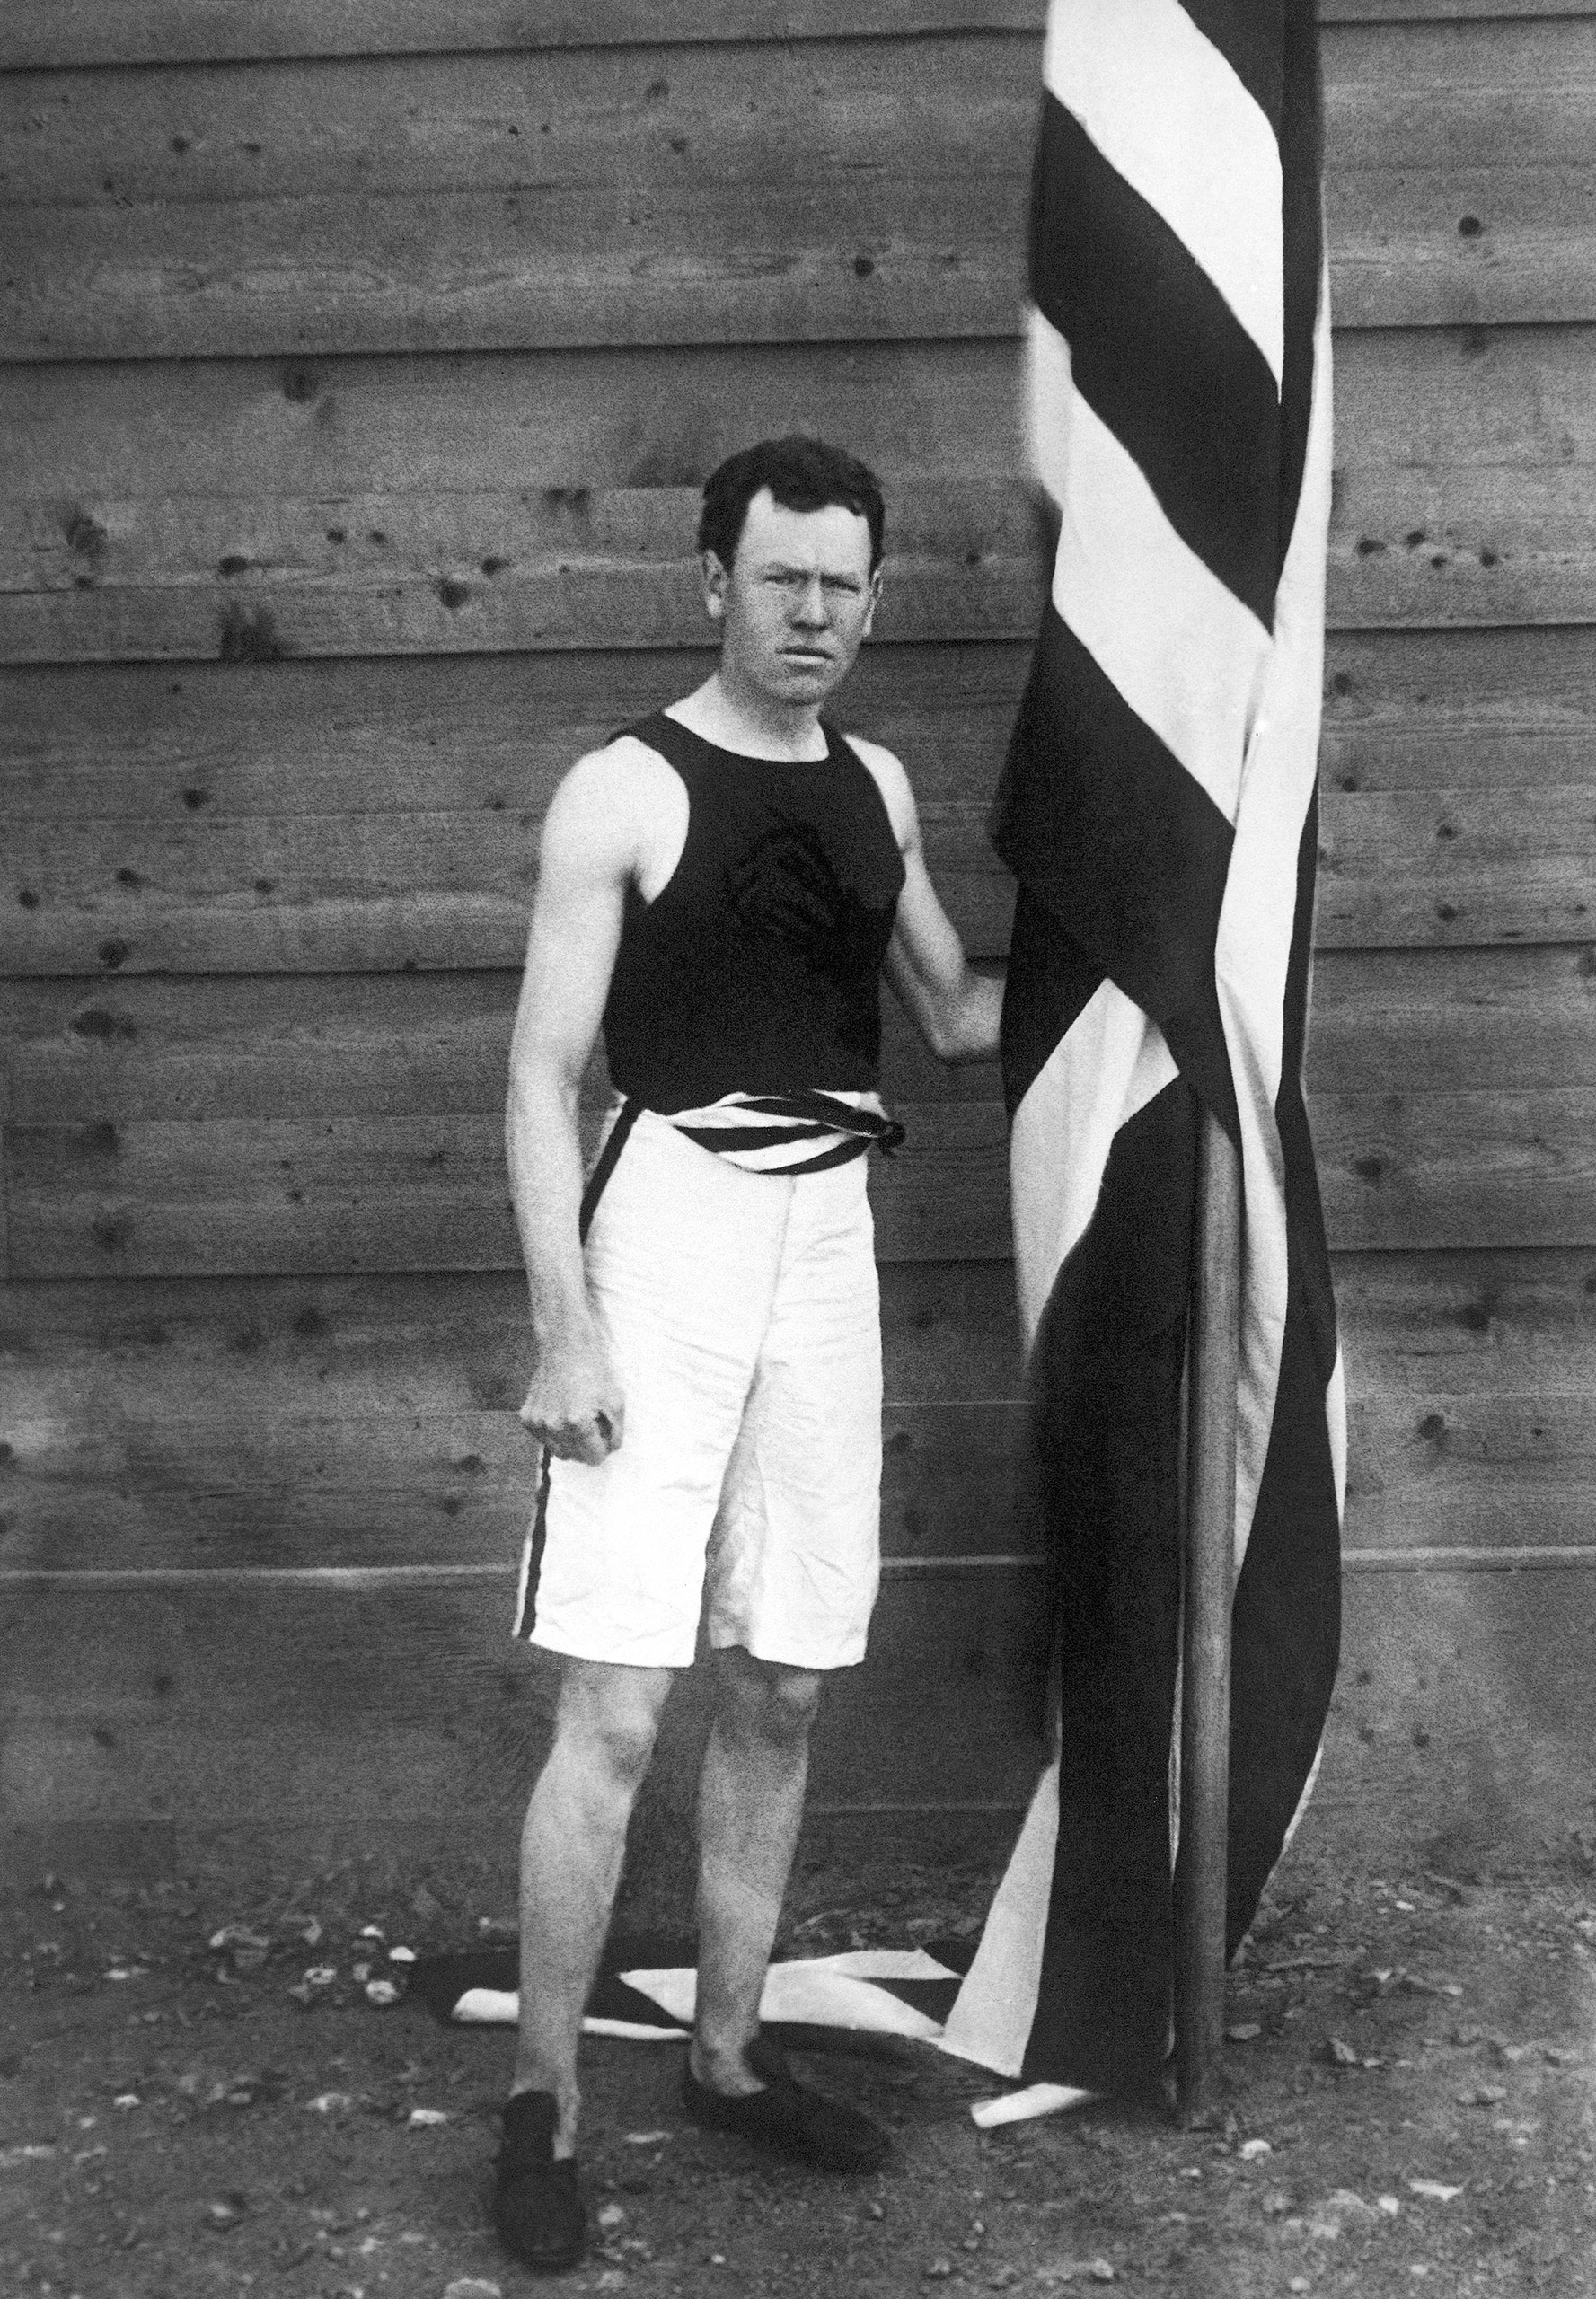 James Brendan Bennet Connolly from South Boston, USA, poses with a flag at the first modern International Summer Olympic Games held at the Panathinaiko Stadium on April 6, 1896 in Athens, where he won the gold medal in triple jump with 13.71 meters.